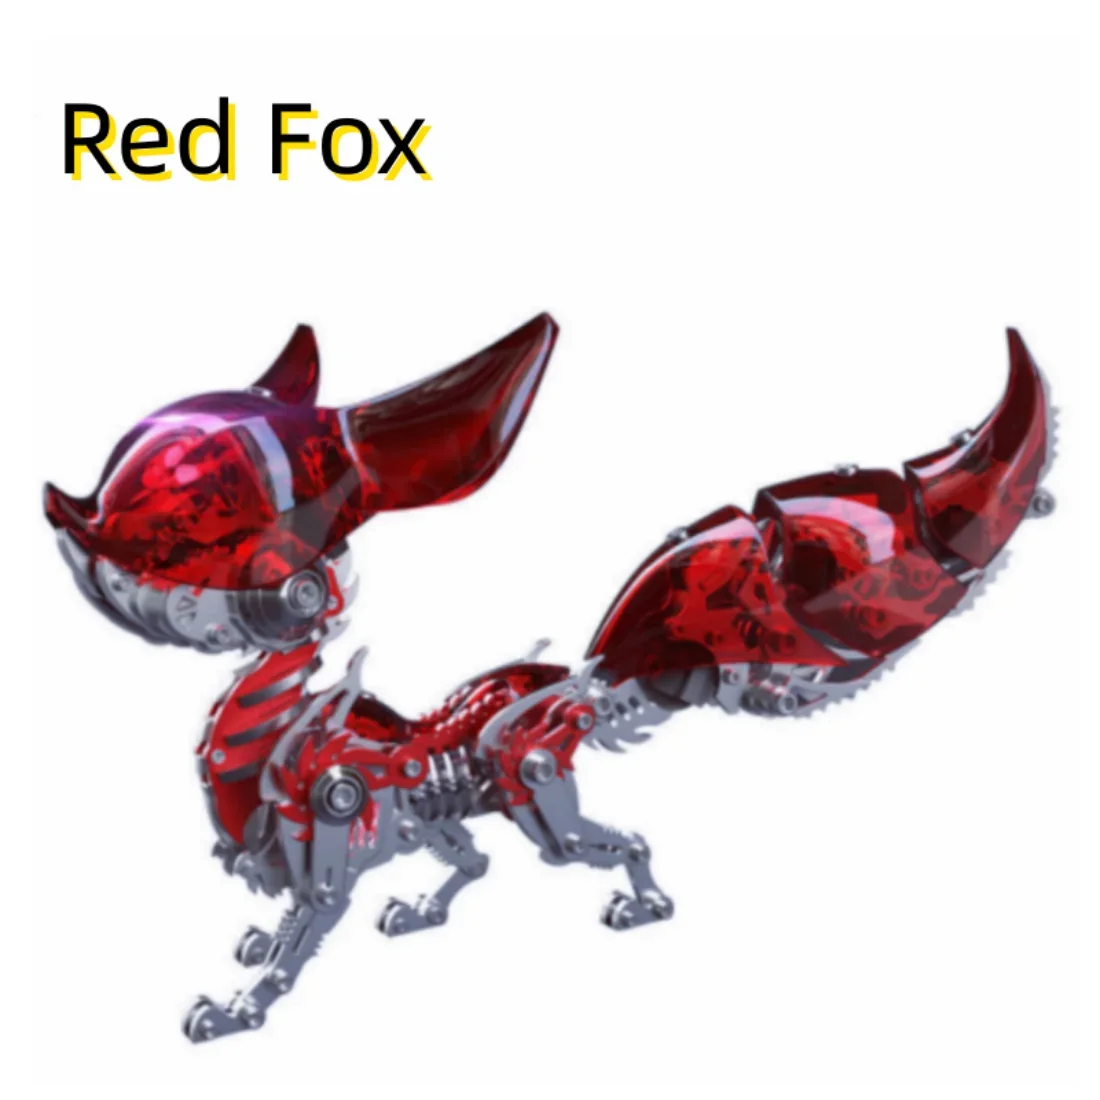 

339PCS 3D Metal Puzzles Mechanical Red Fox Hanfei Model Kits Steampunk Assembly Toys for Kids Adults Collection Gifts